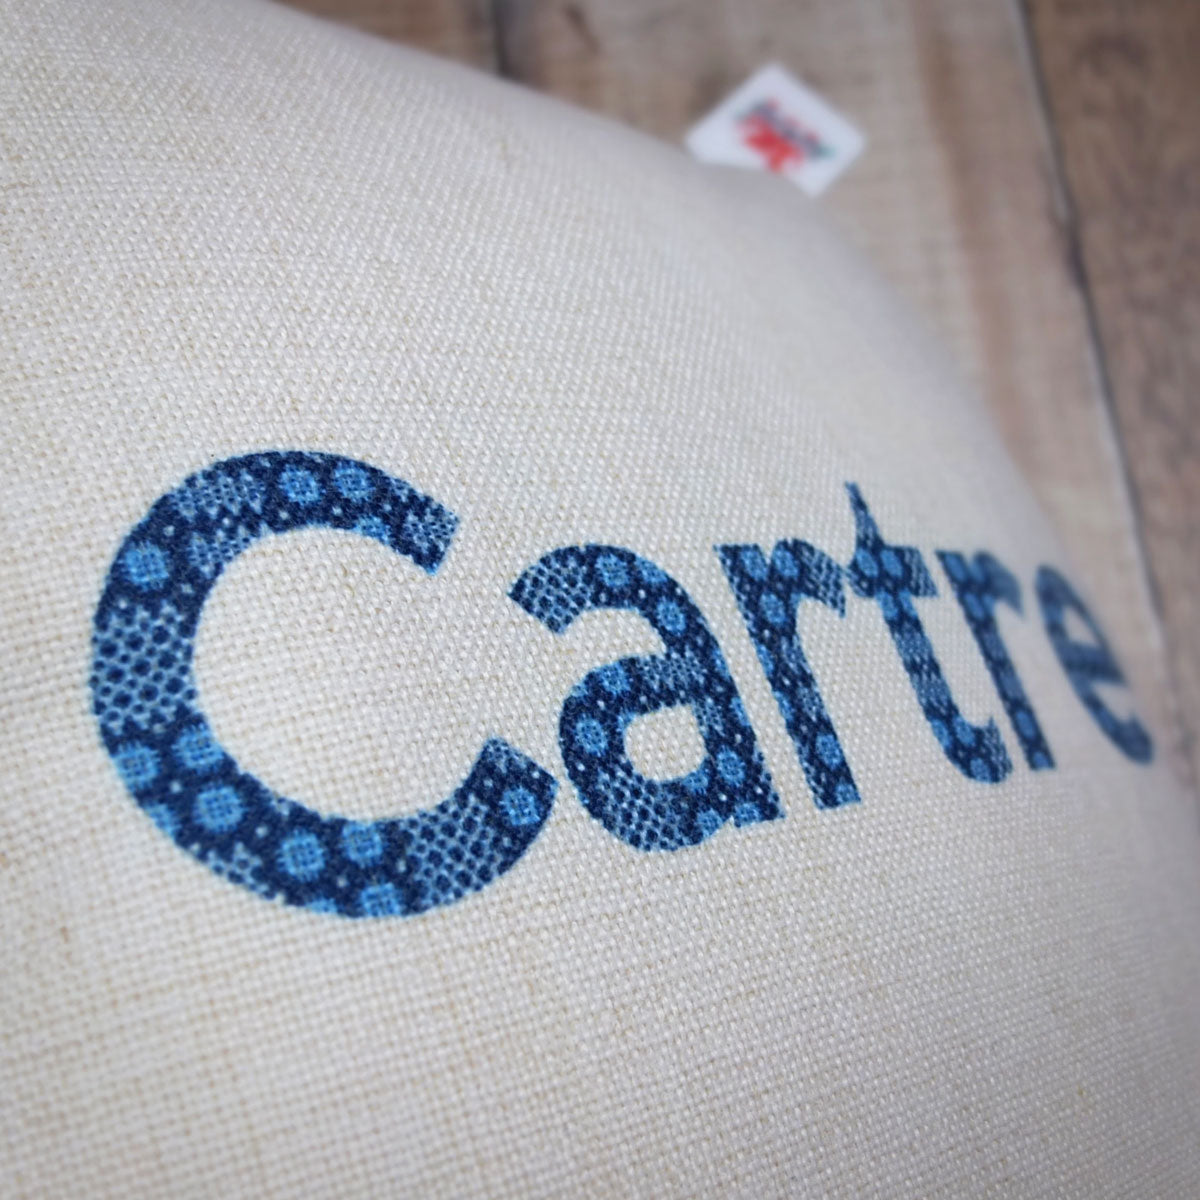 Cartref Tapestry Cushion